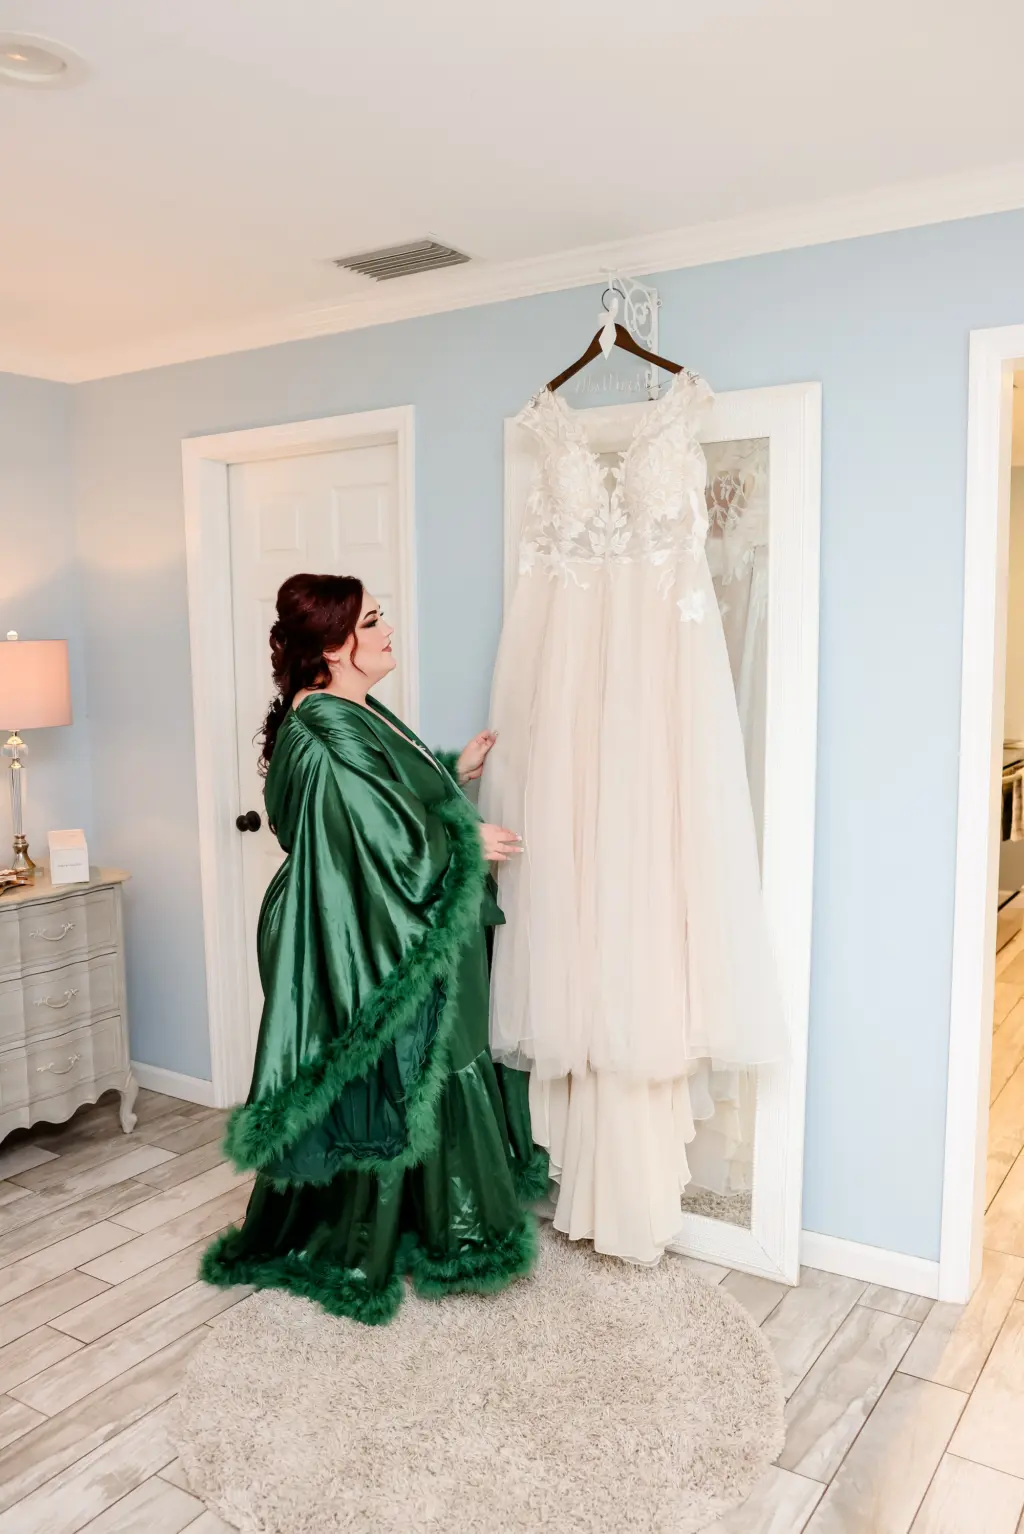 Bride Getting Ready | Nude Sheer Bodice A-line Wedding Dress Ideas | Emerald Green Floor Length Satin and Feather Floor Length Robe | Tampa Bay Hair and Makeup Artist Femme Akoi Beauty Studio